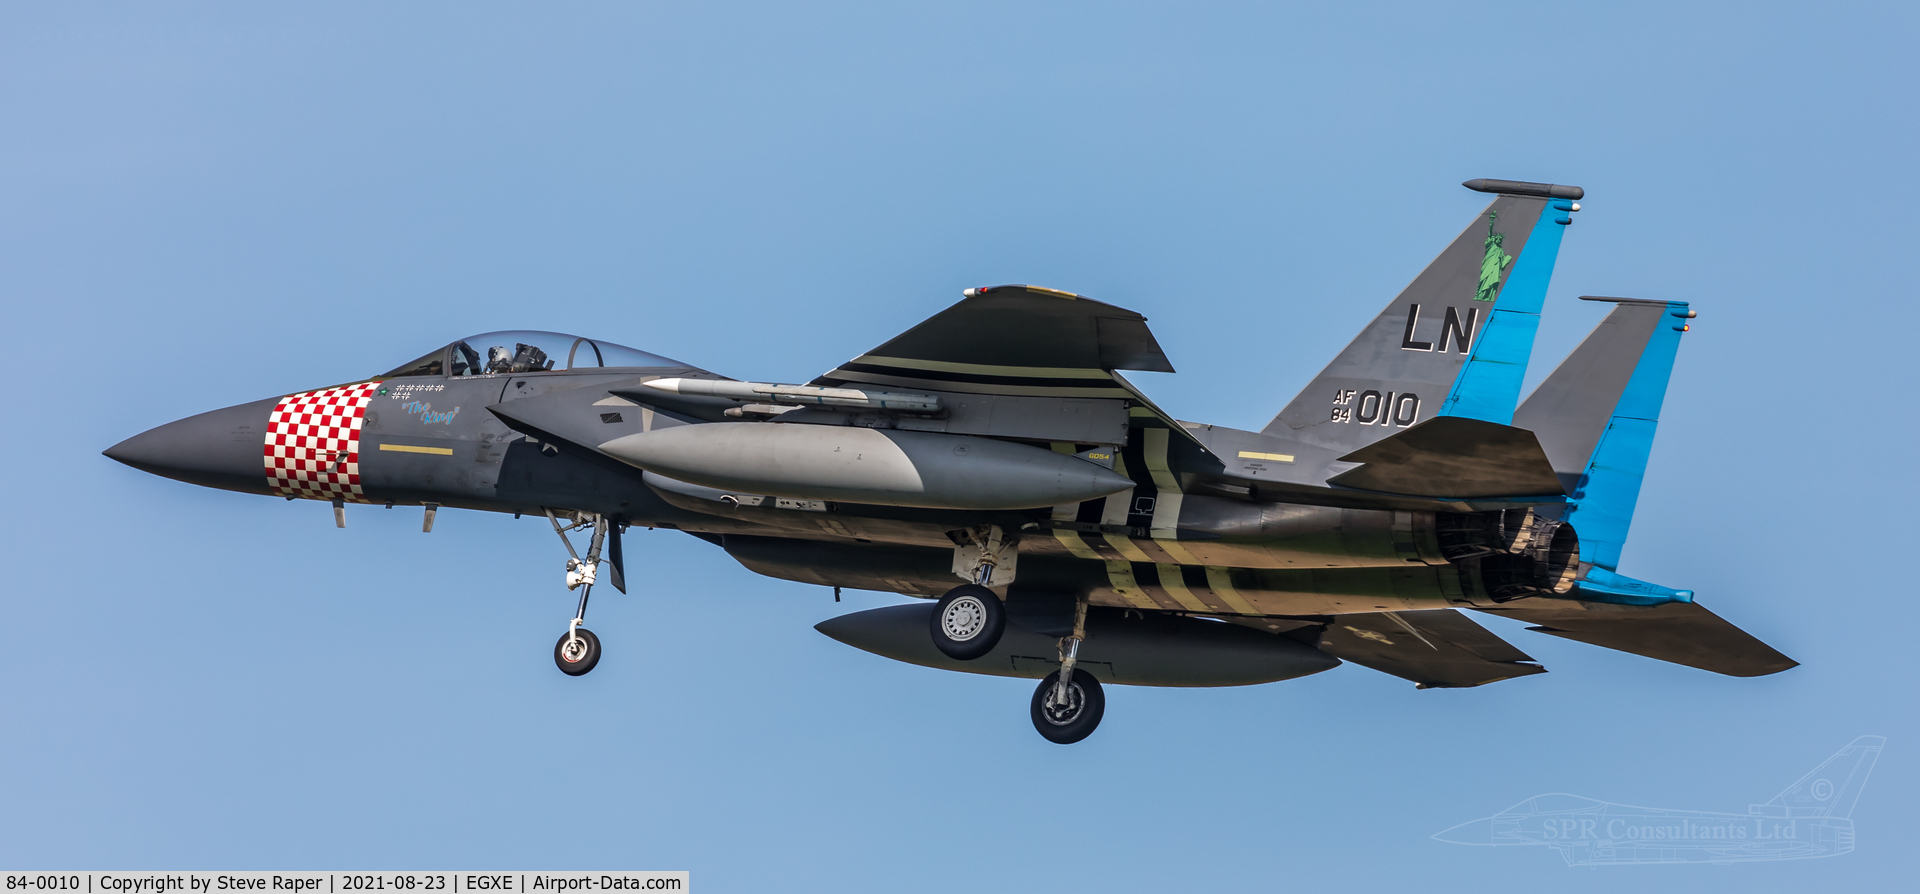 84-0010, 1984 McDonnell Douglas F-15C Eagle C/N 0919/C313, The King has entered the building, on arrival to RAF Leeming.